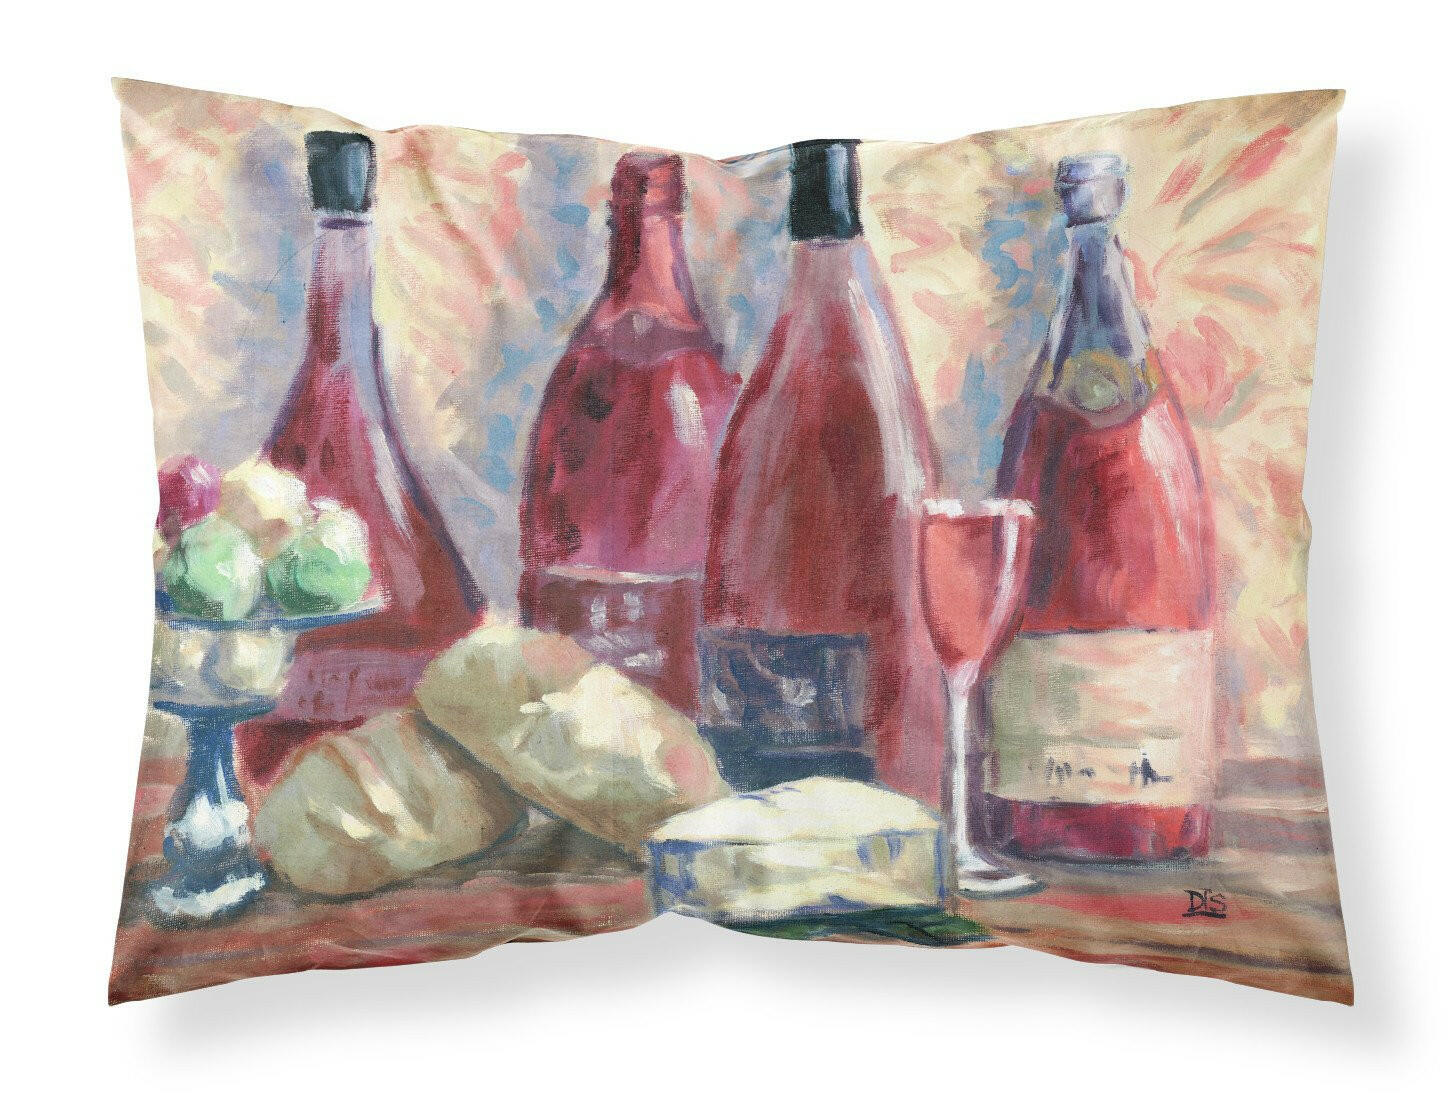 Wine and Cheese by David Smith Fabric Standard Pillowcase SDSM0127PILLOWCASE by Caroline's Treasures